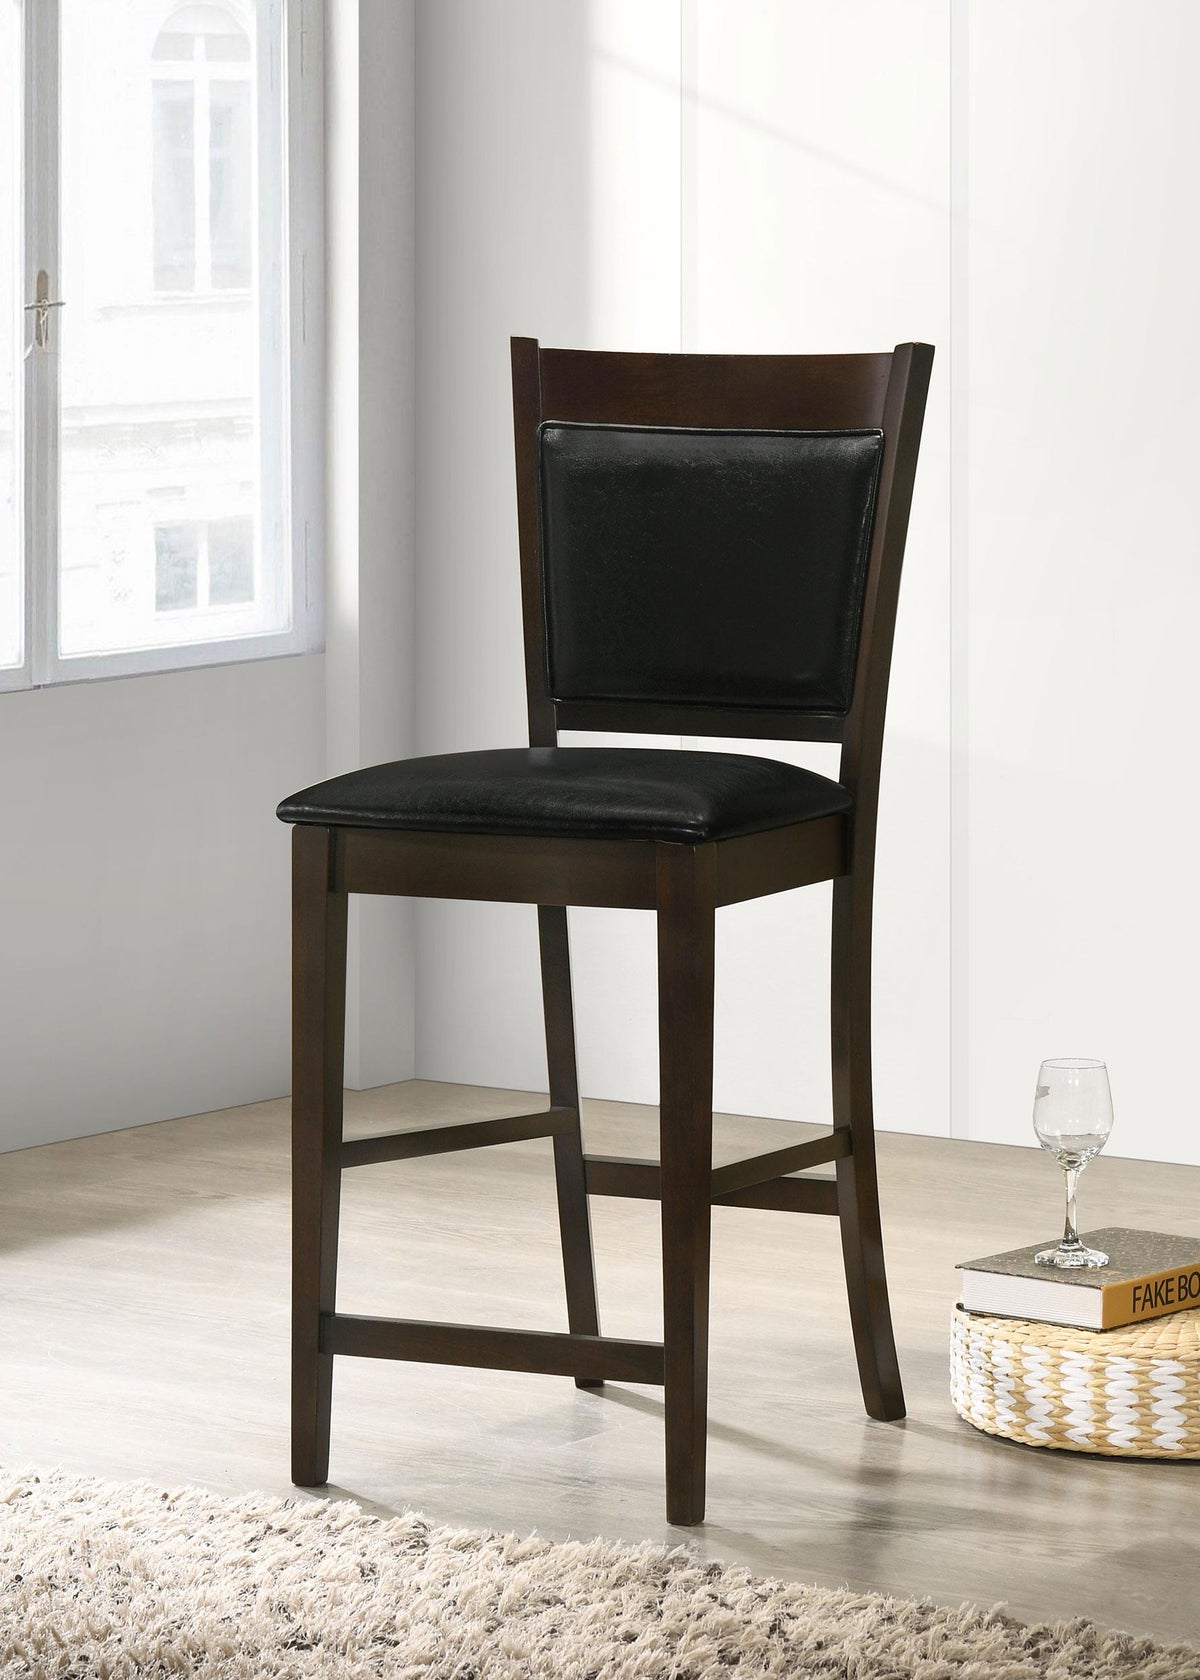 Jaden Upholstered Counter Height Stools Black and Espresso (Set of 2)  Half Price Furniture